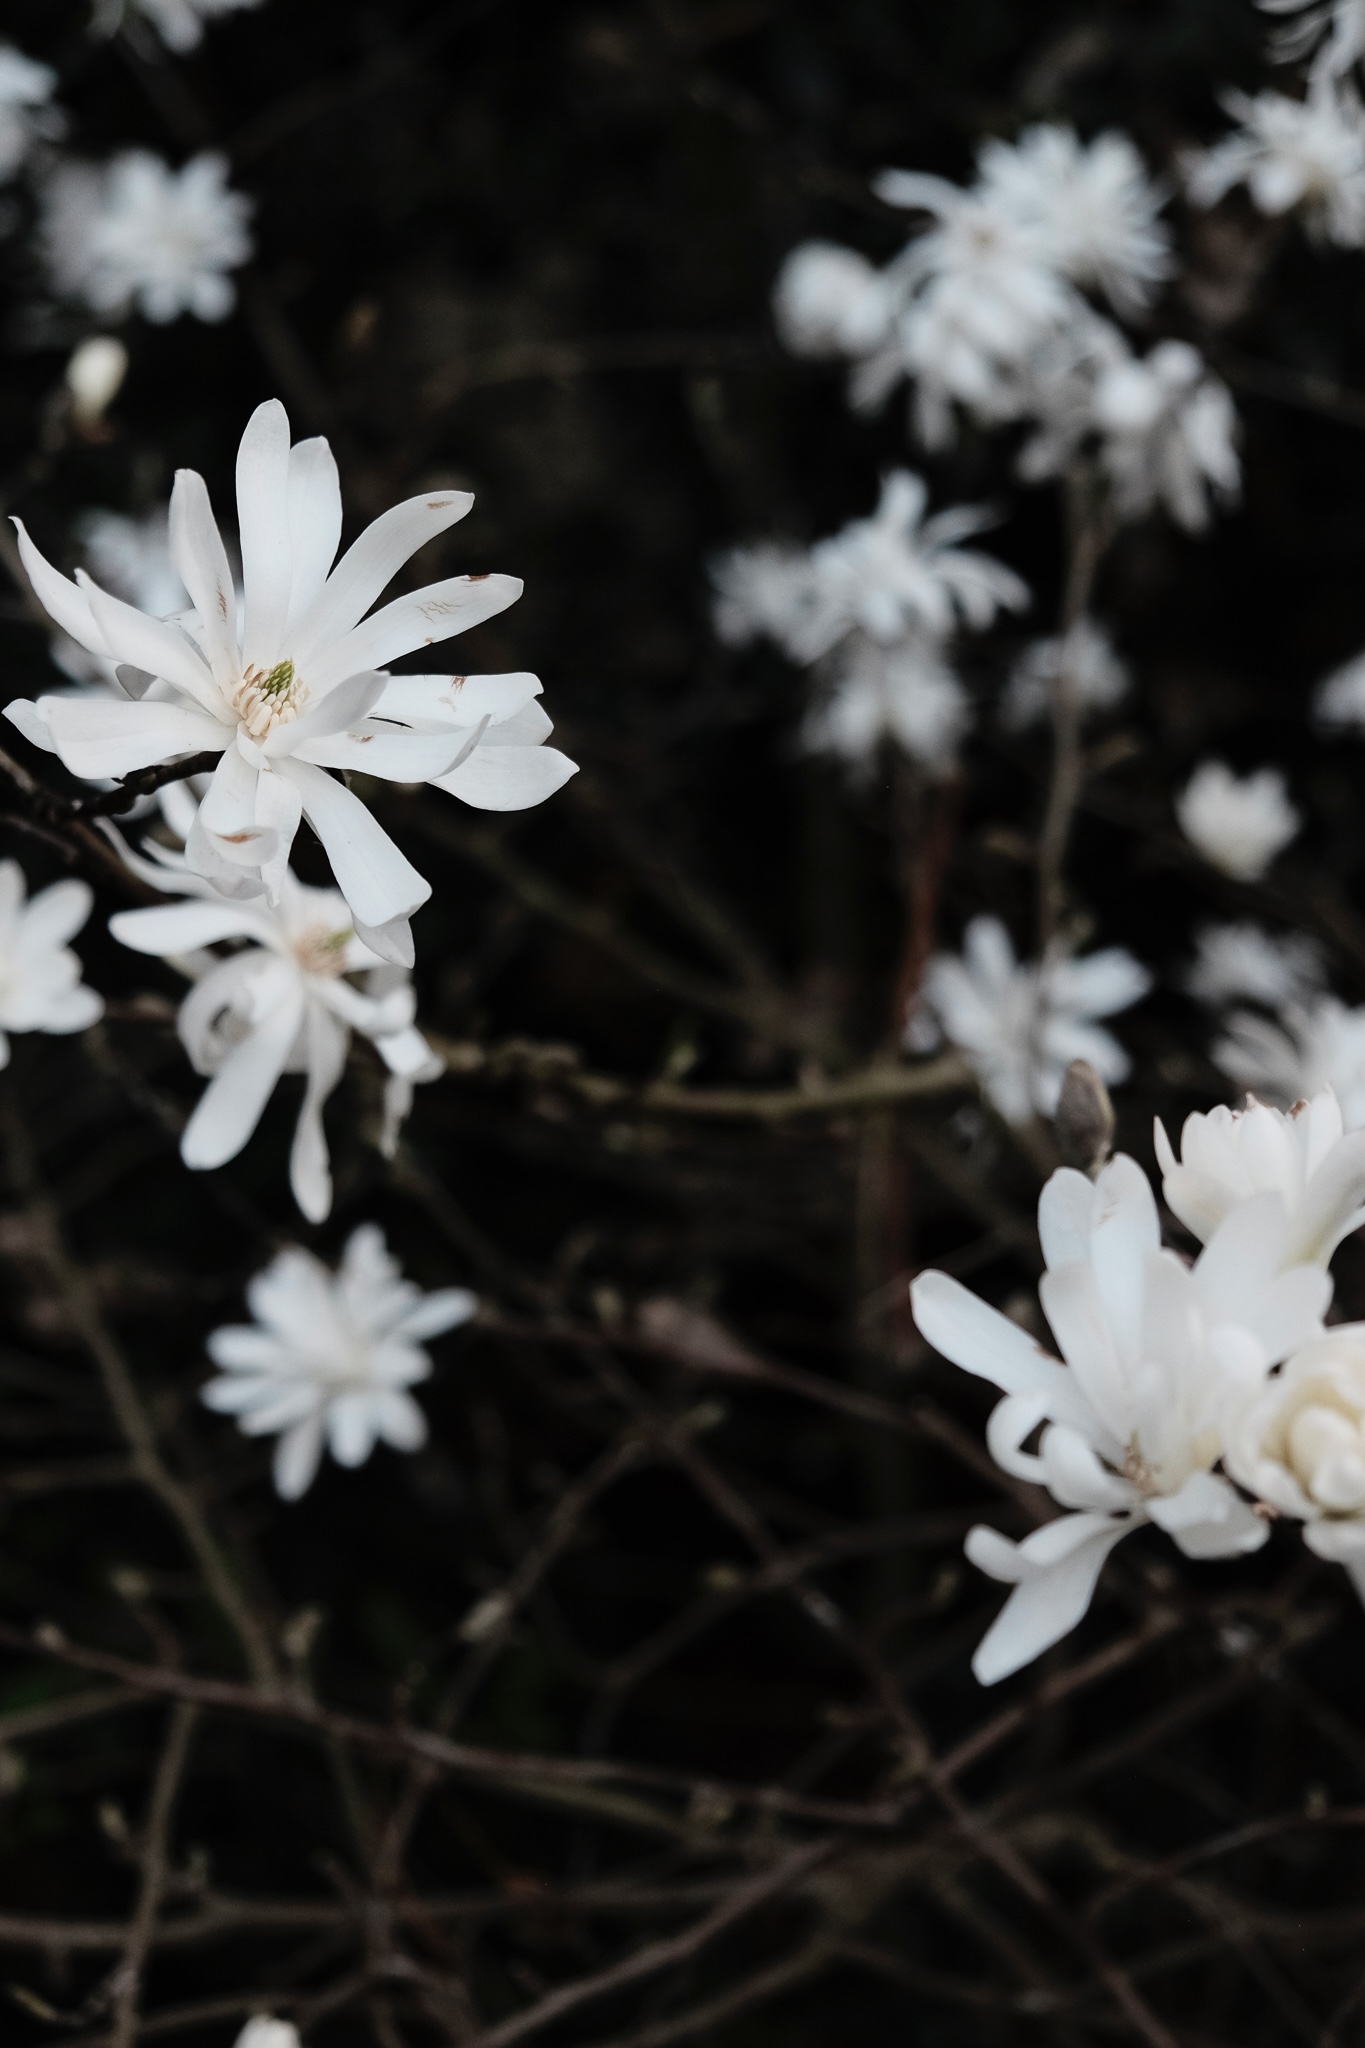 Delicate white magnolia flowers against a dark background